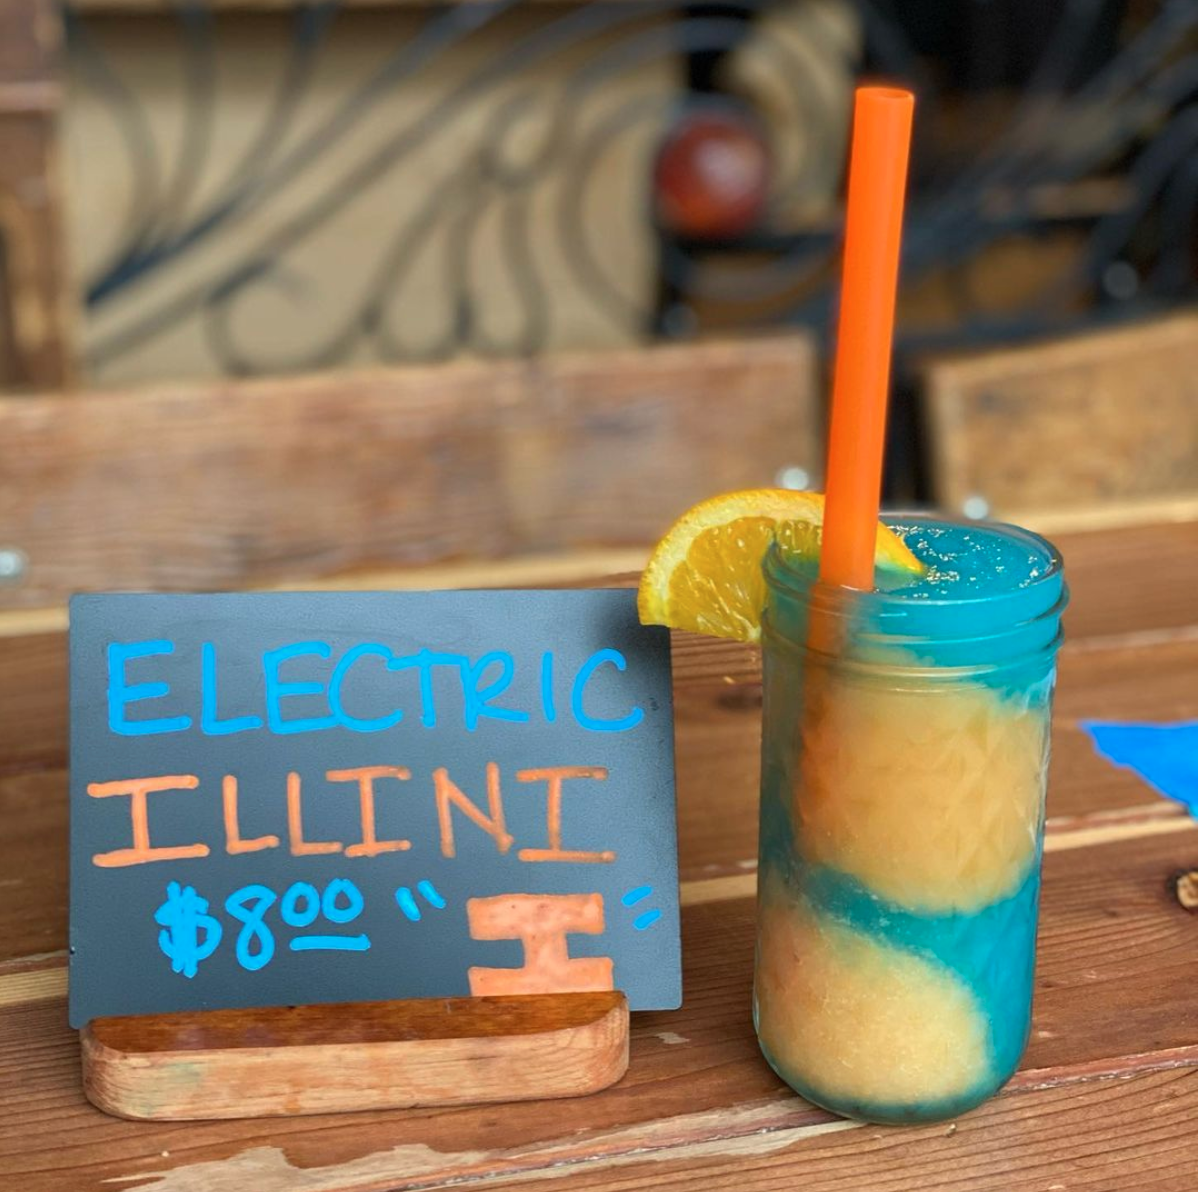 This frozen cocktail from Watson’s just screams I-L-L!